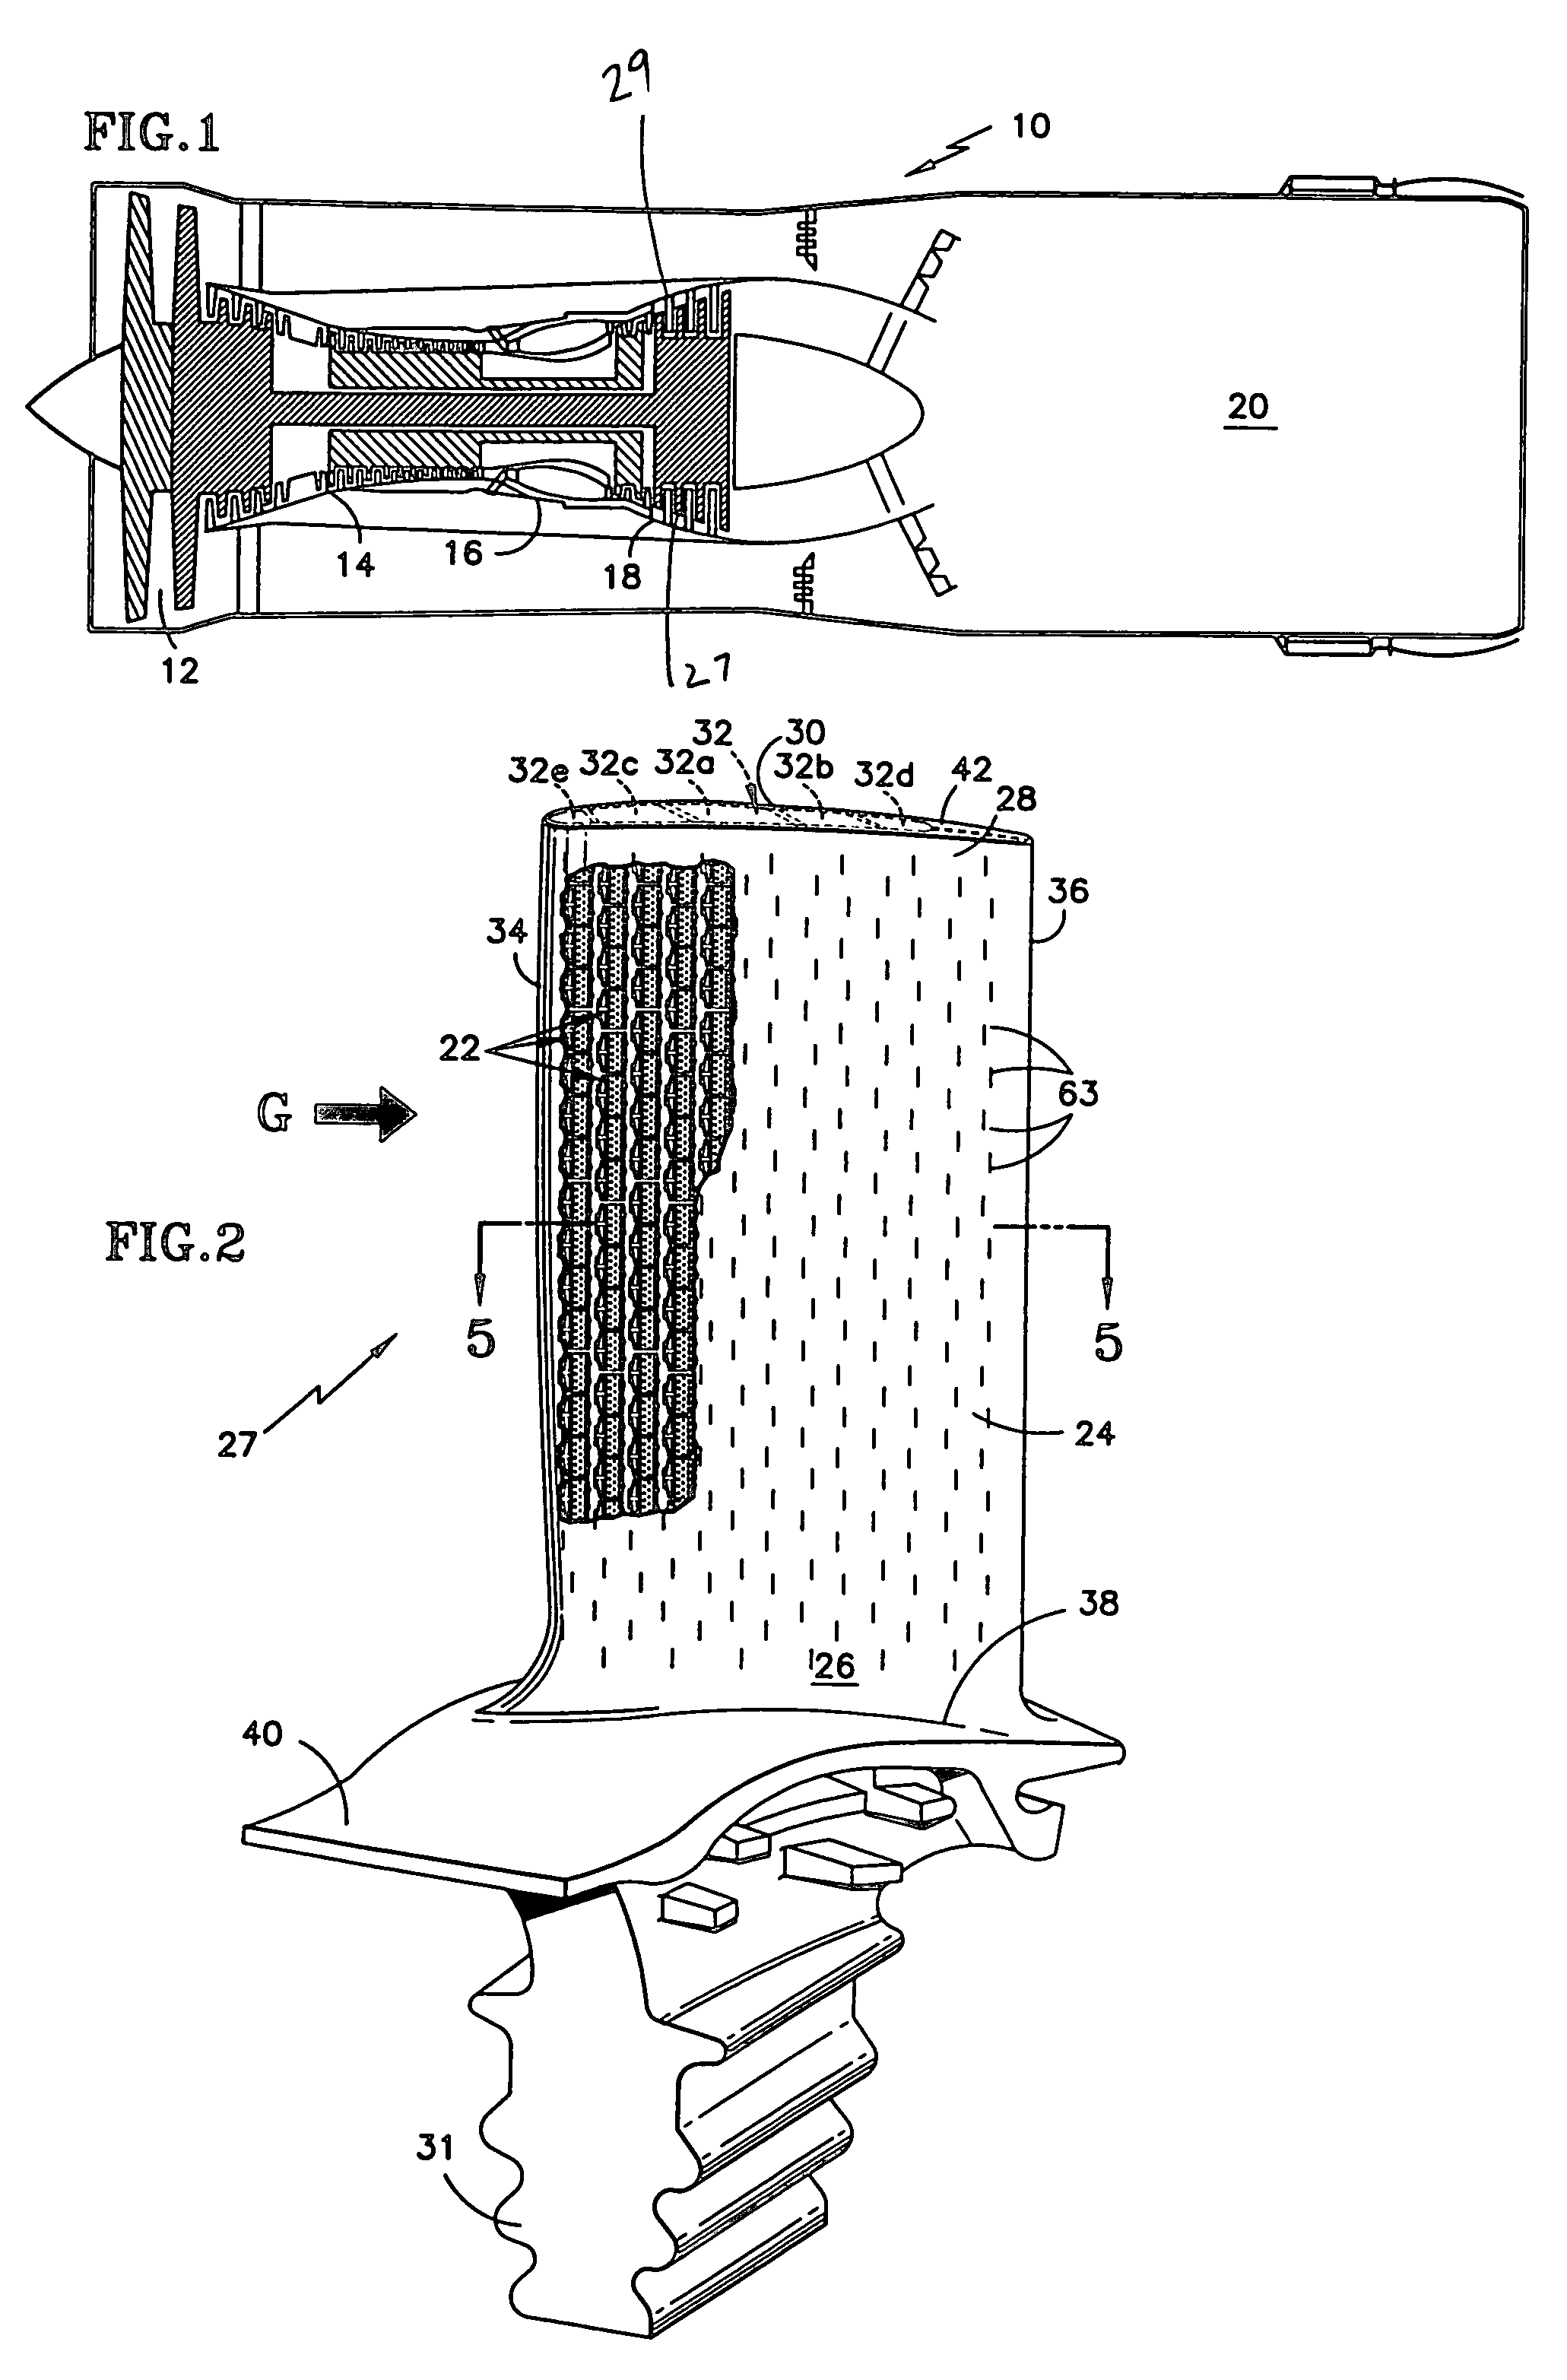 Microcircuit cooling for a turbine airfoil